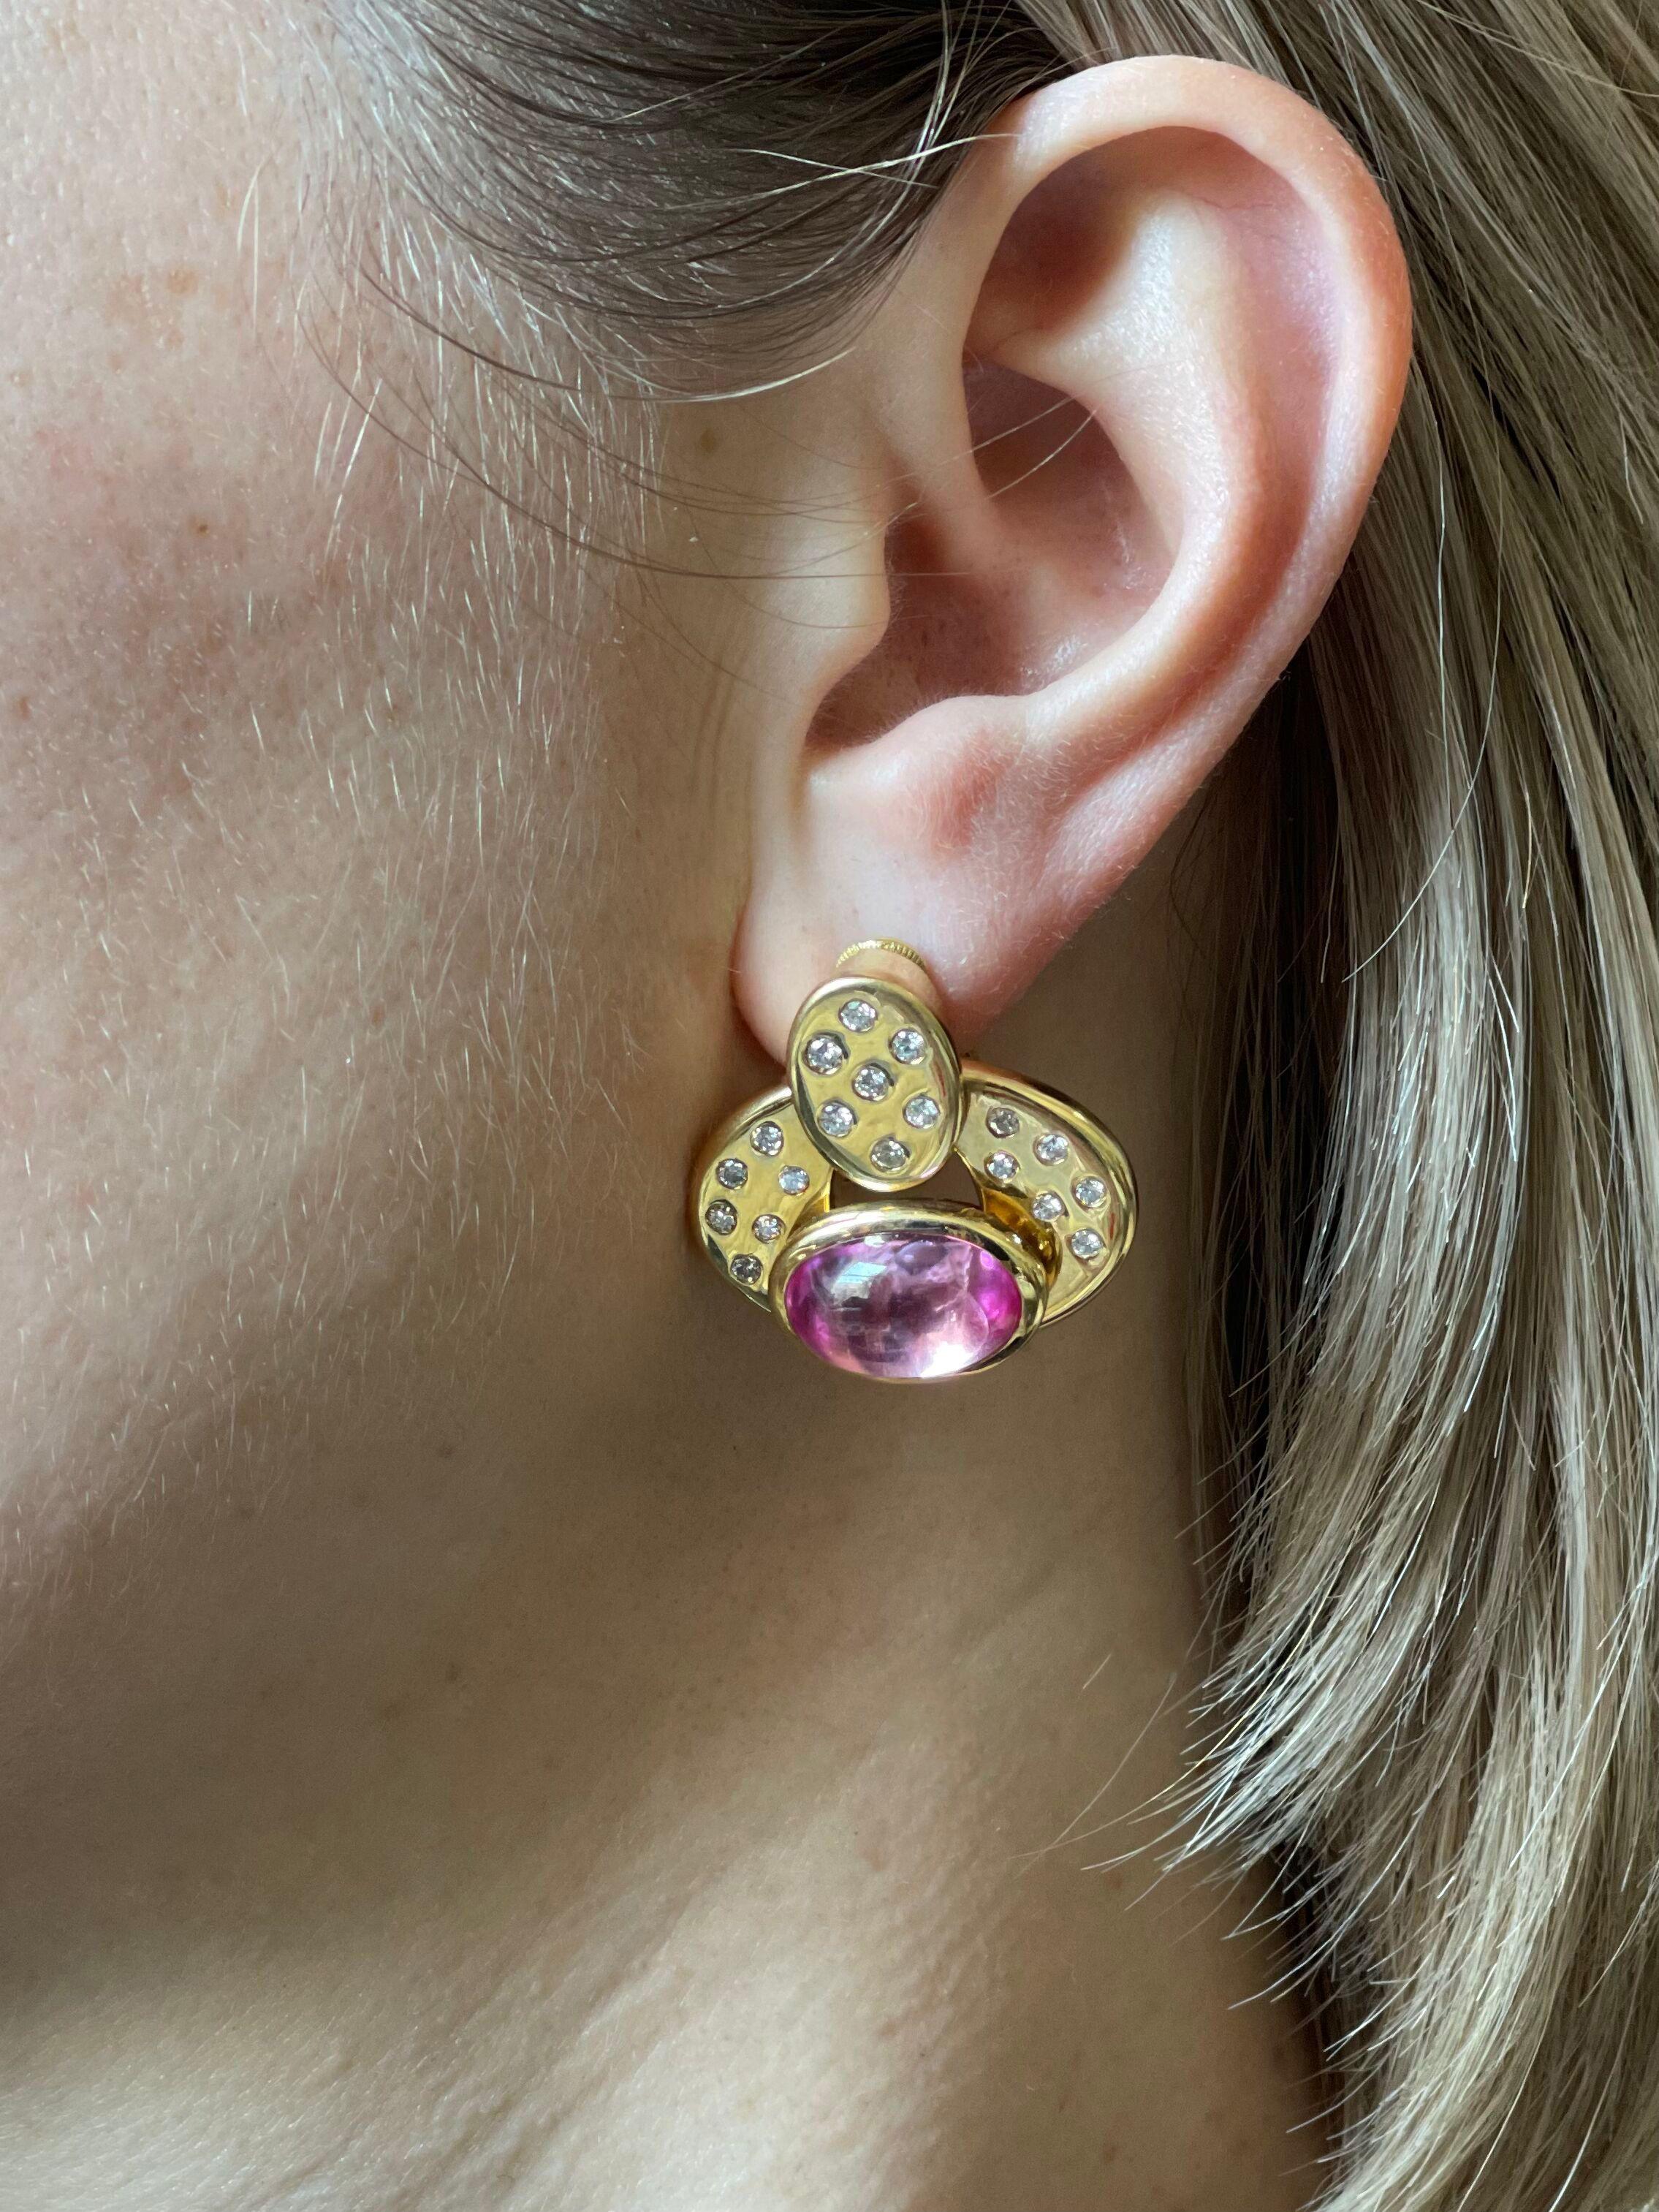 Pair of 18k gold earrings by Marina B, set with oval 15 x 10mm pink tourmaline cabochons, and approx. 0.80ctw G/VS diamonds. Earrings measure 1 1/8